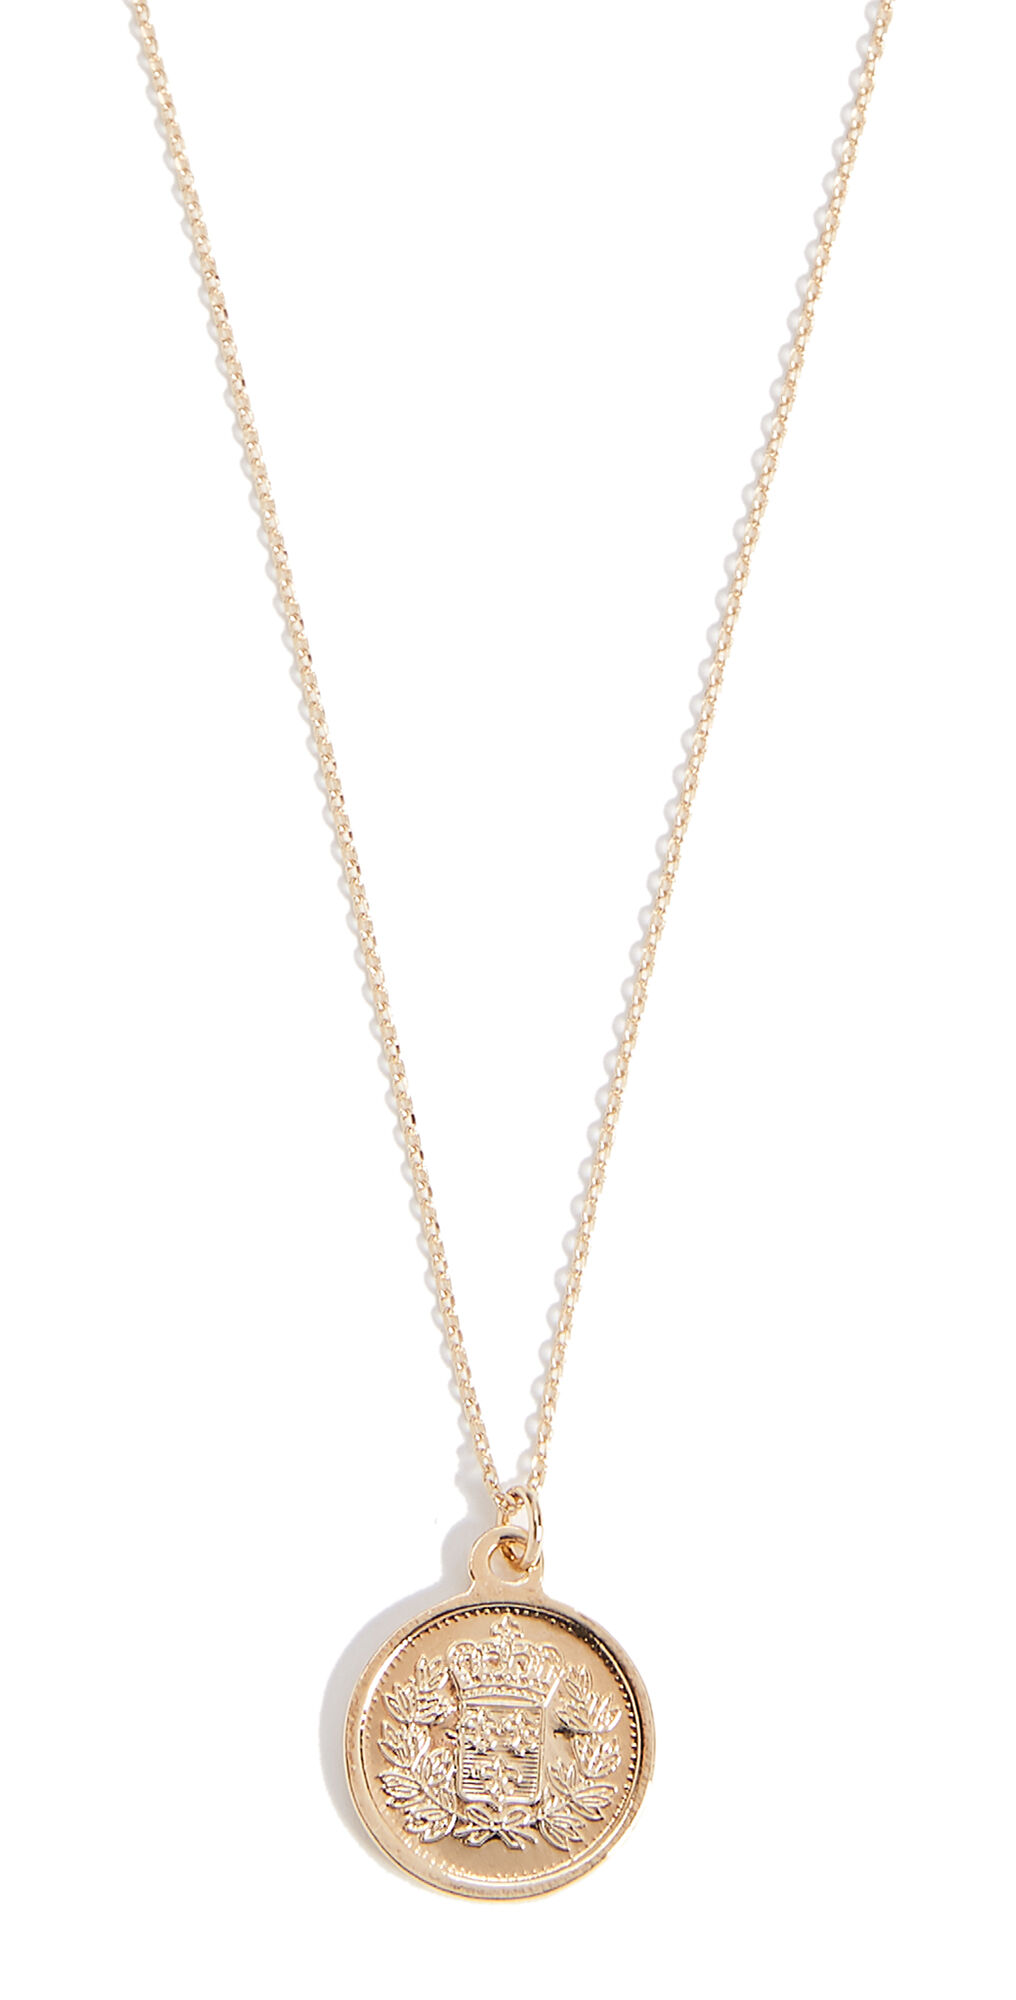 Cloverpost 1971 Necklace Yellow Gold One Size  Yellow Gold  size:One Size